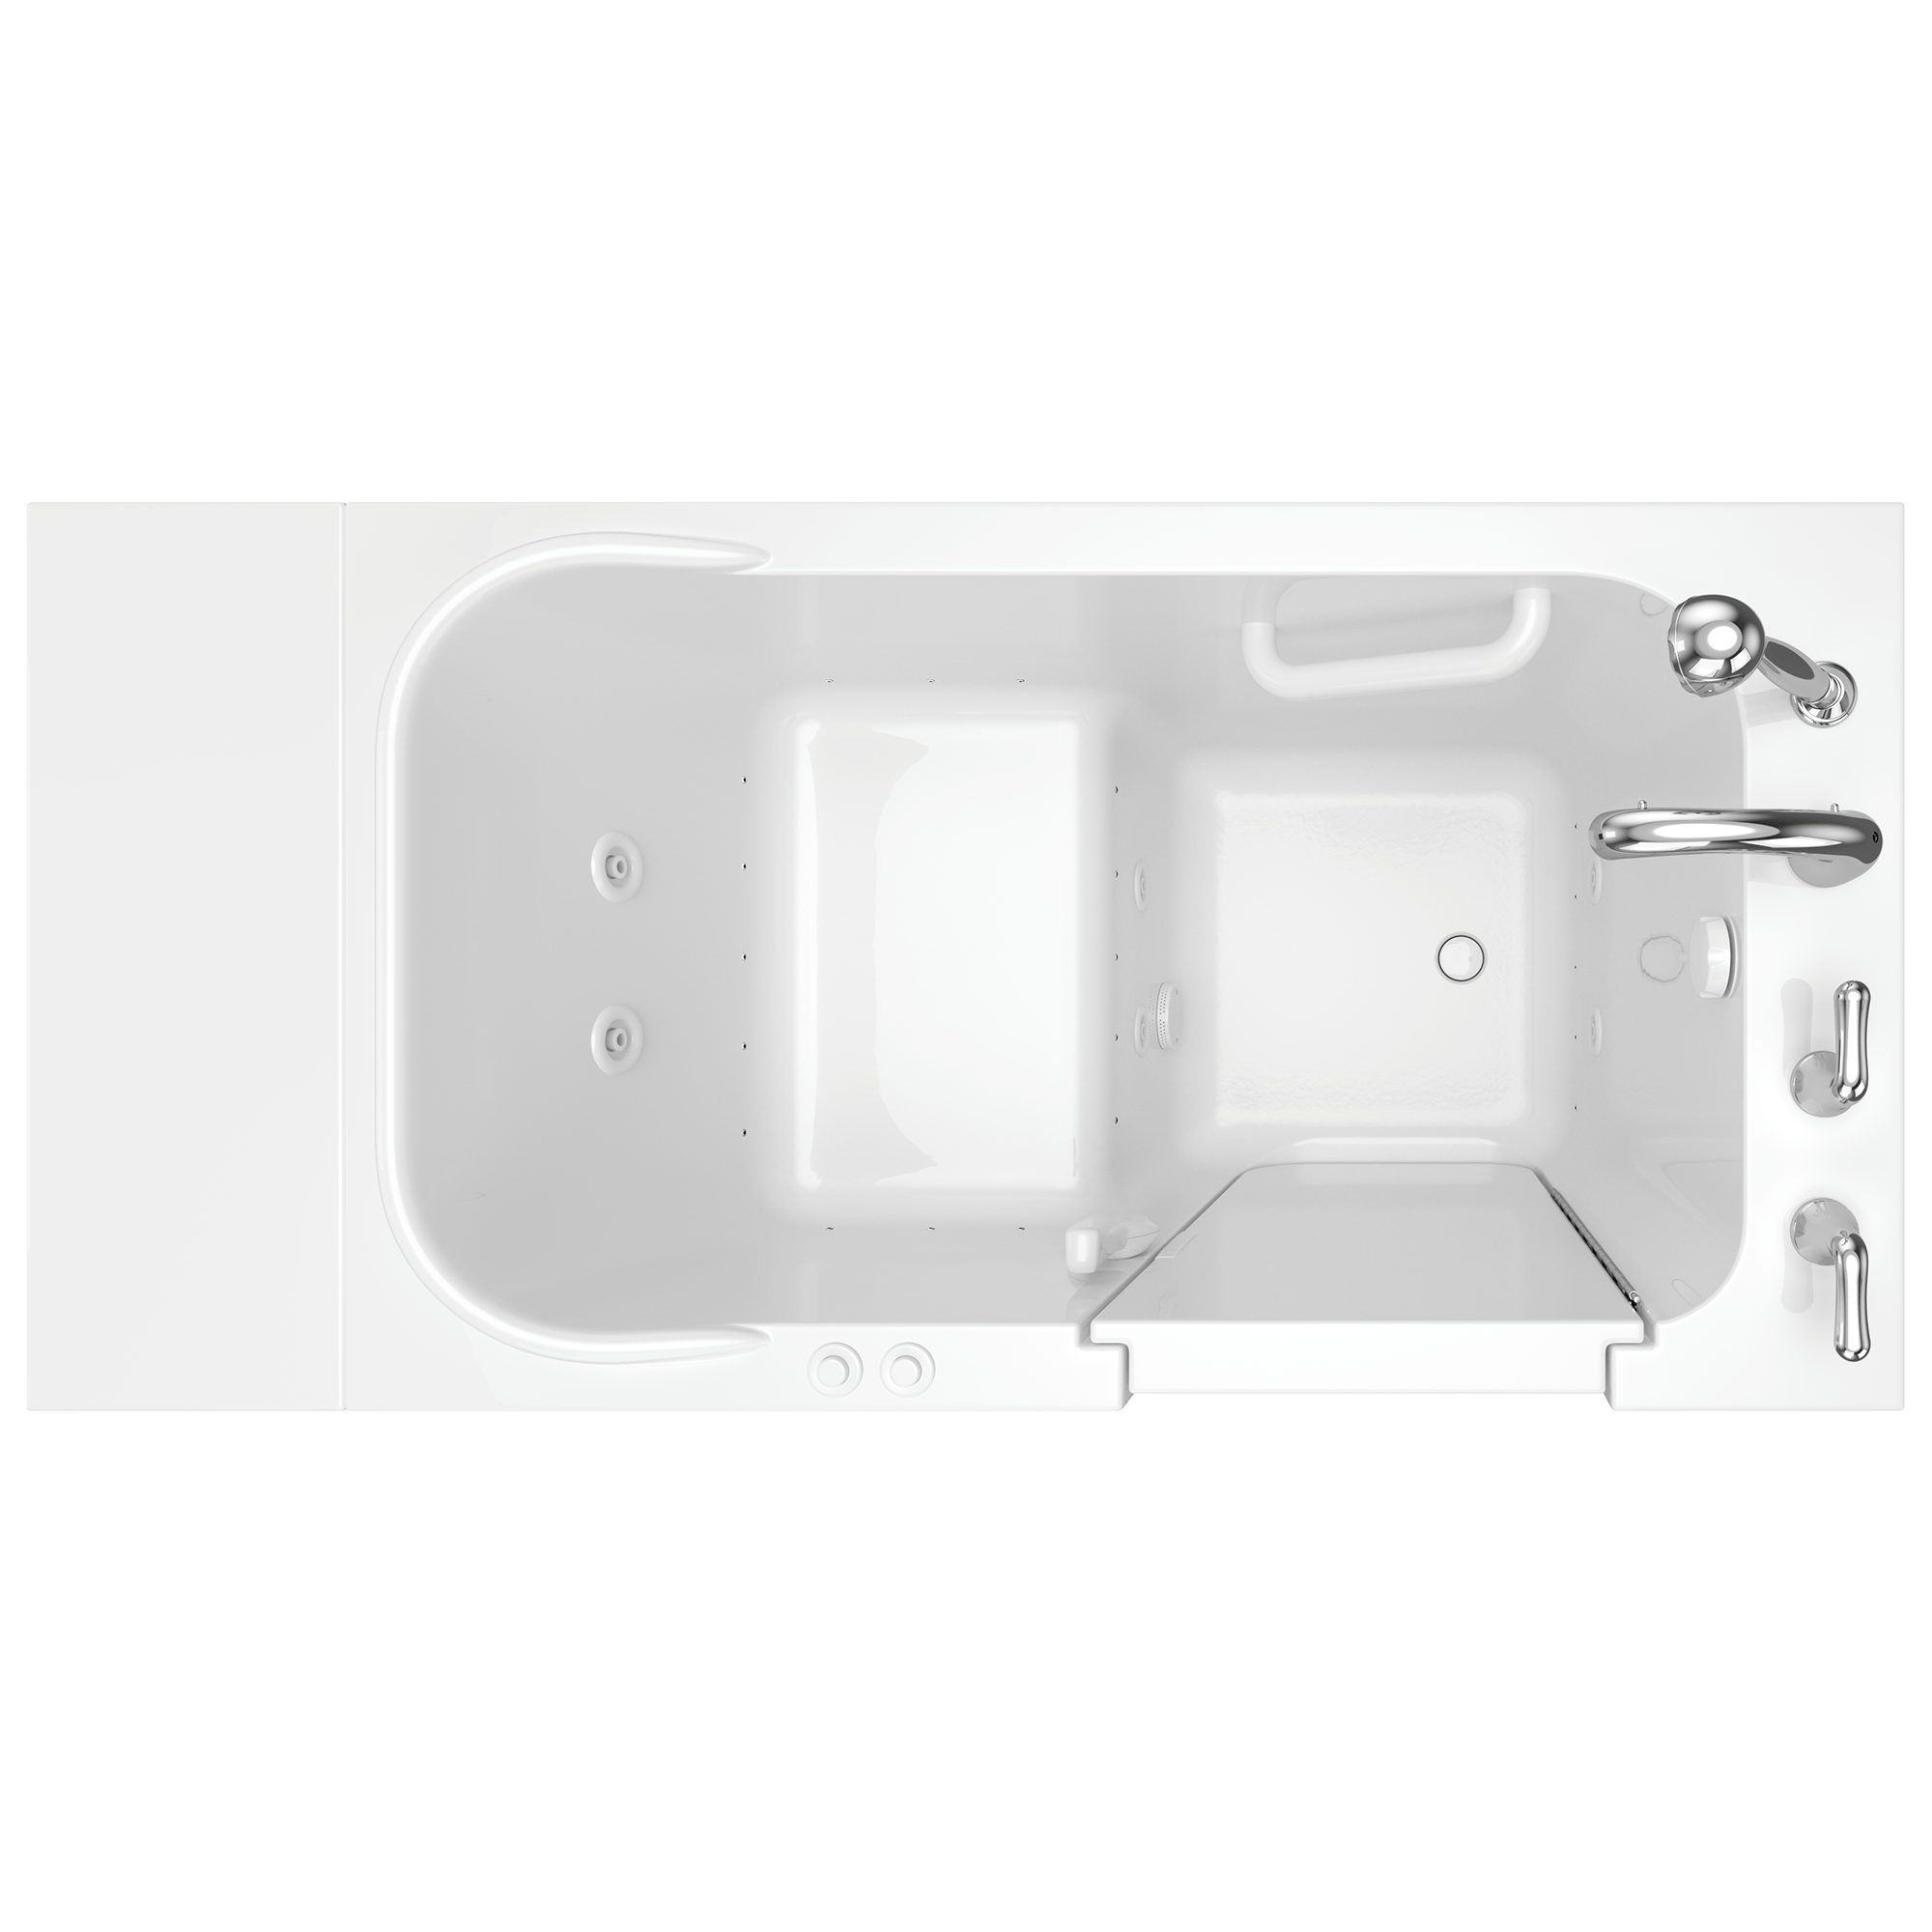 Gelcoat Entry Series 48 x 28 Inch Walk In Tub With Combination Air Spa and Whirlpool Systems - Right Hand Drain With Faucet WIB WHITE